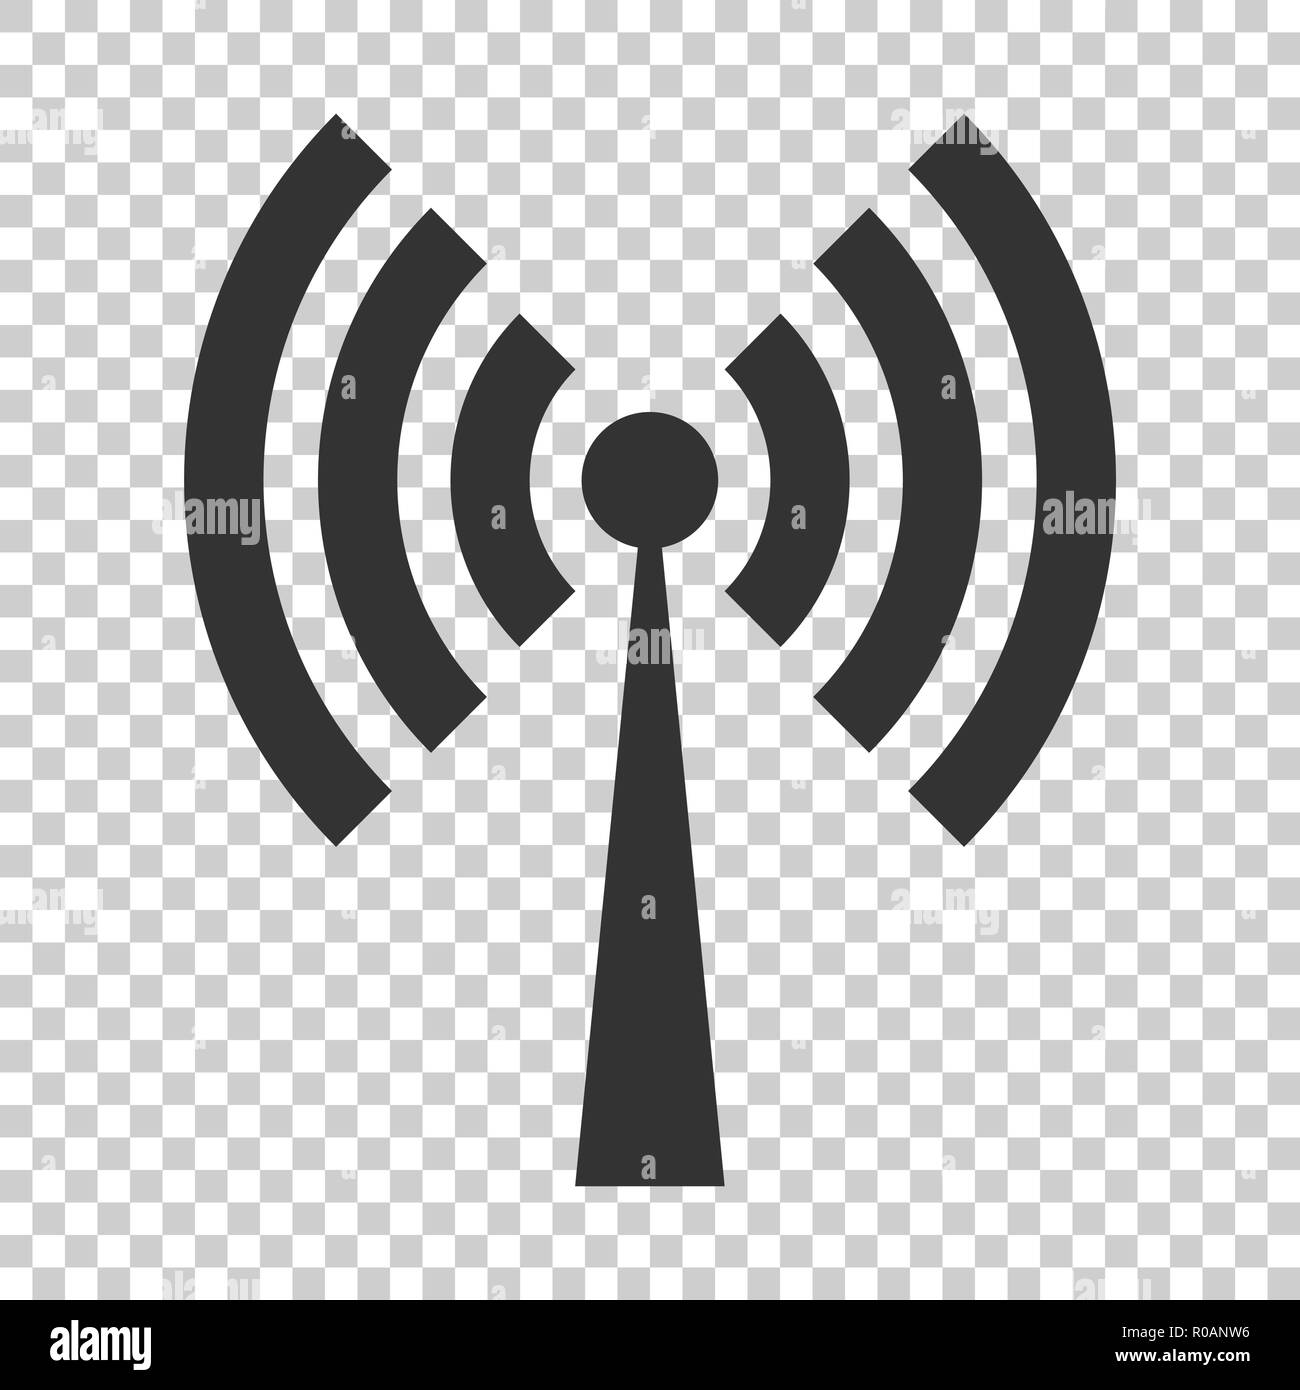 Wifi internet sign icon in flat style. Wi-fi wireless technology vector illustration on isolated background. Network wifi business concept. Stock Vector